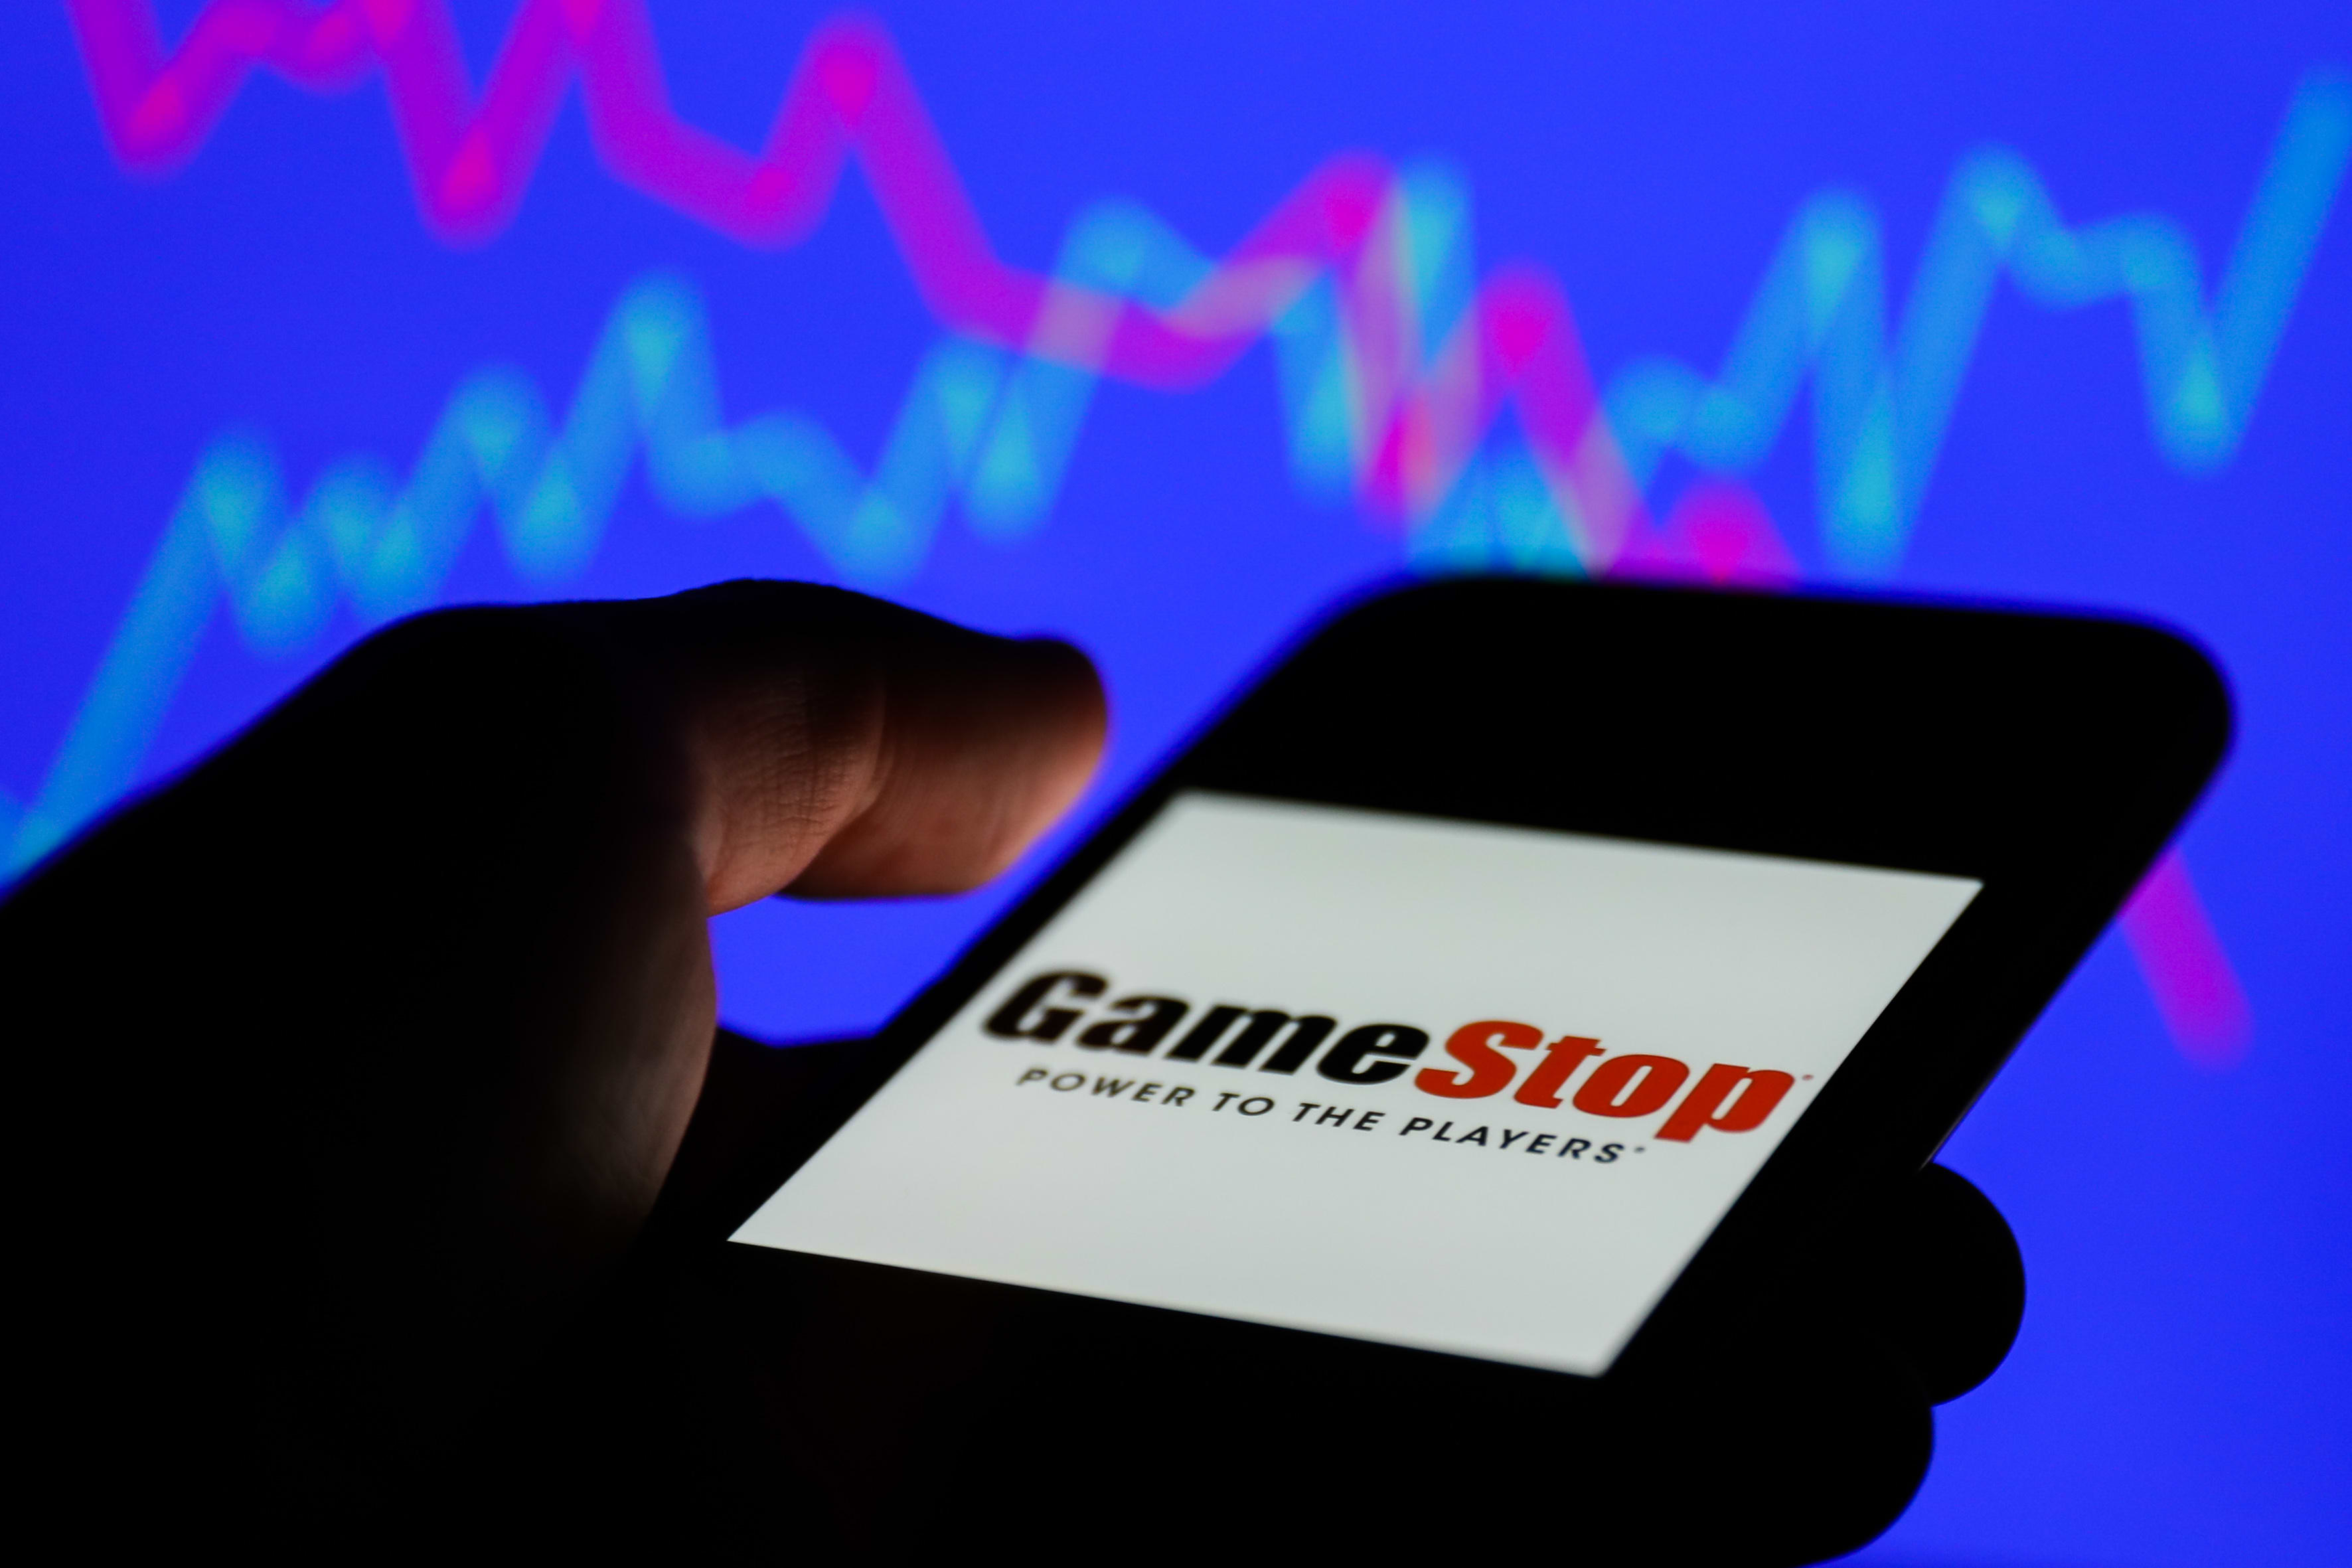 GameStop shares rise in the pre-market as Reddit favorites recover again